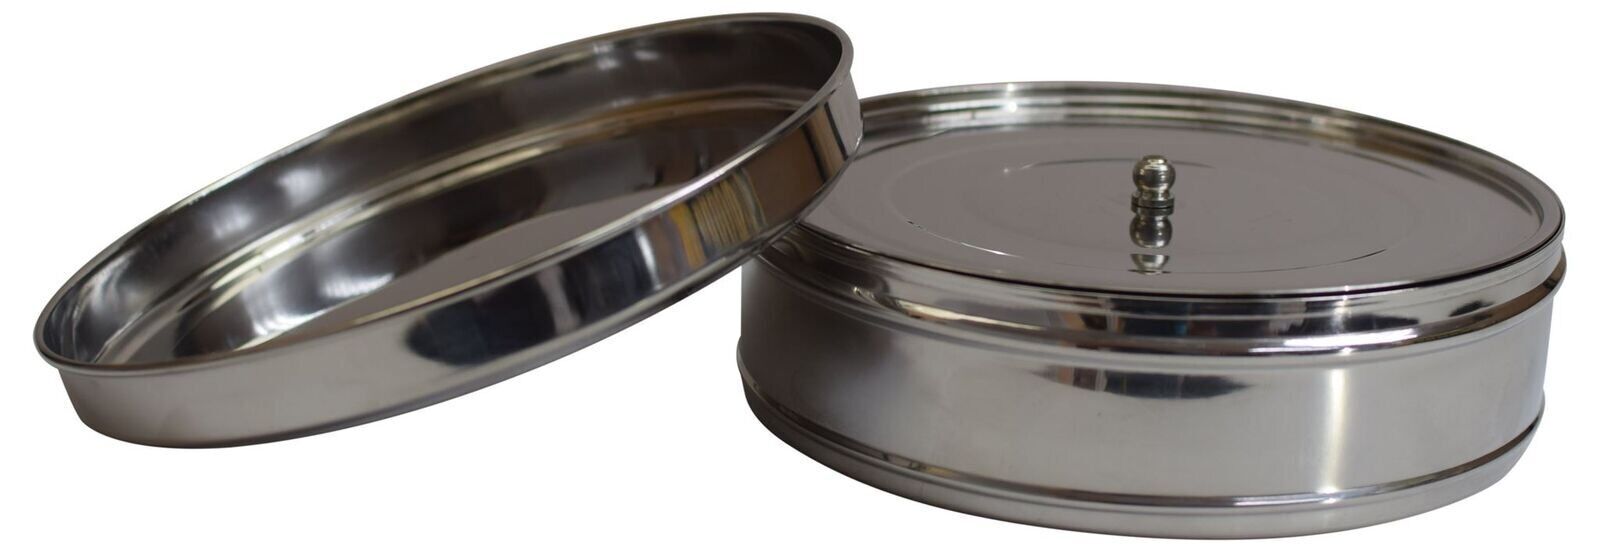 Stainless Steel Indian Spice Box, Indian Double Lid Masala Dabba, Masala Box Ste